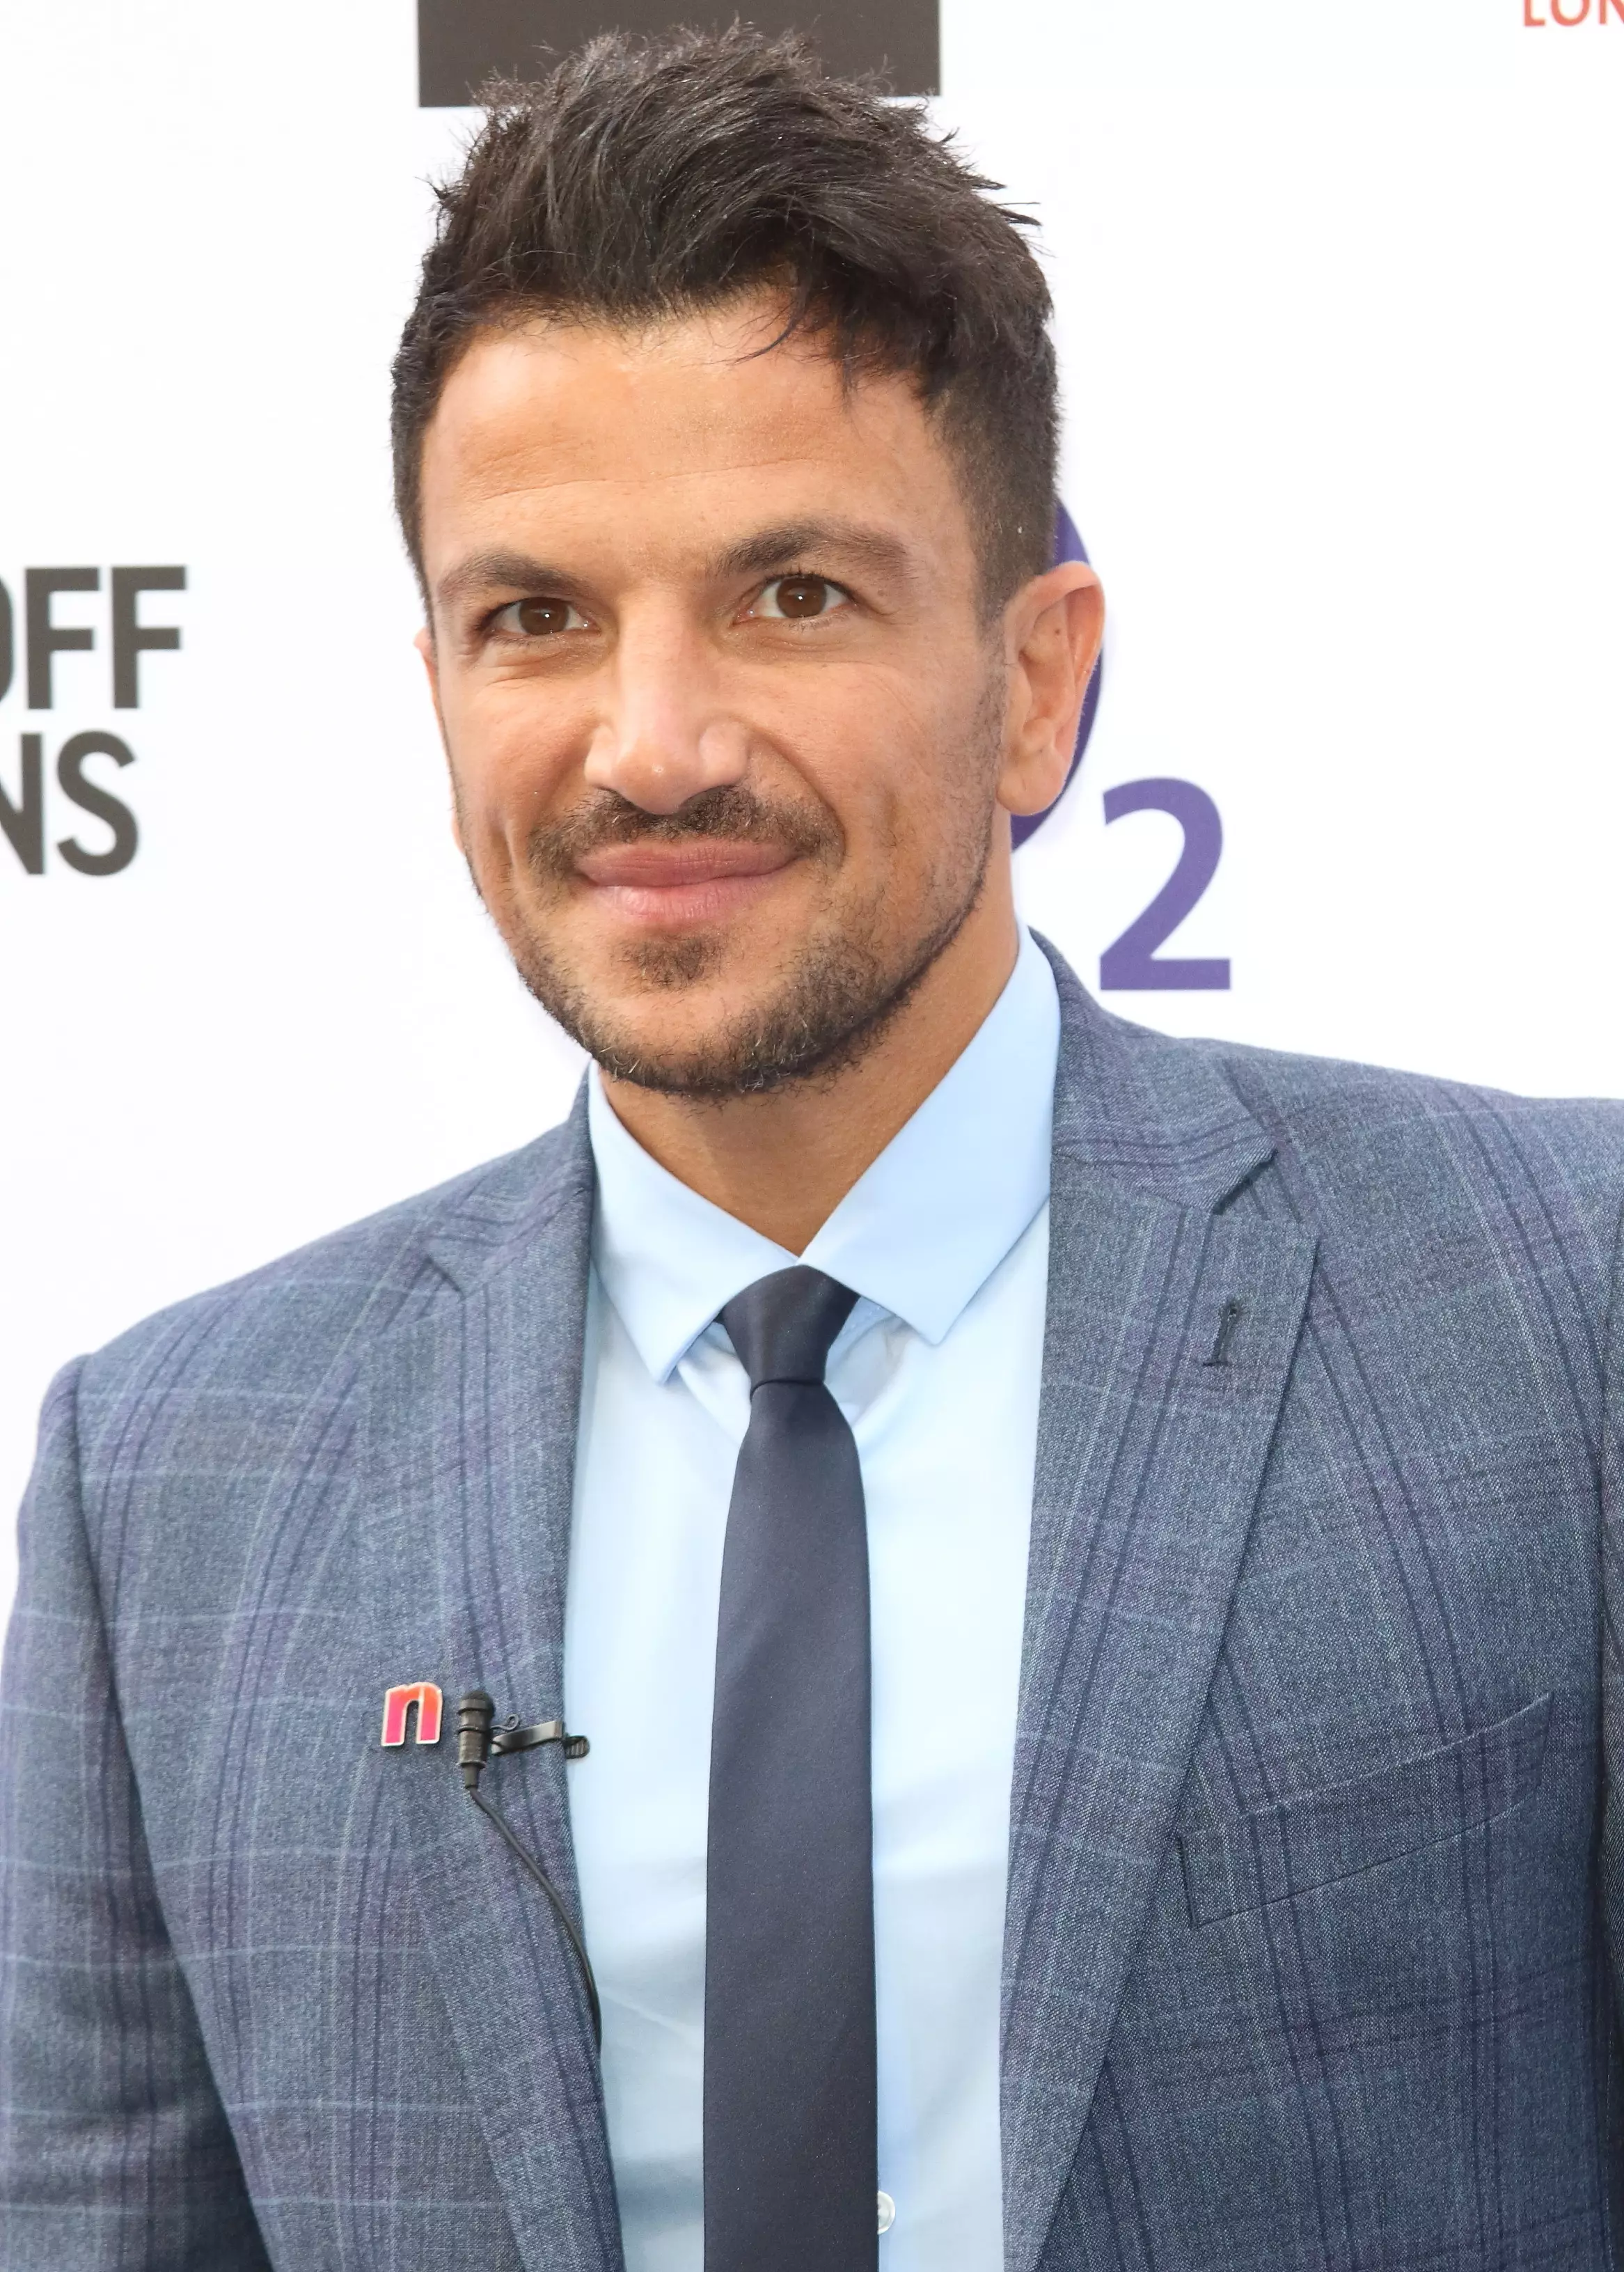 Peter Andre has never commented on the remarks (